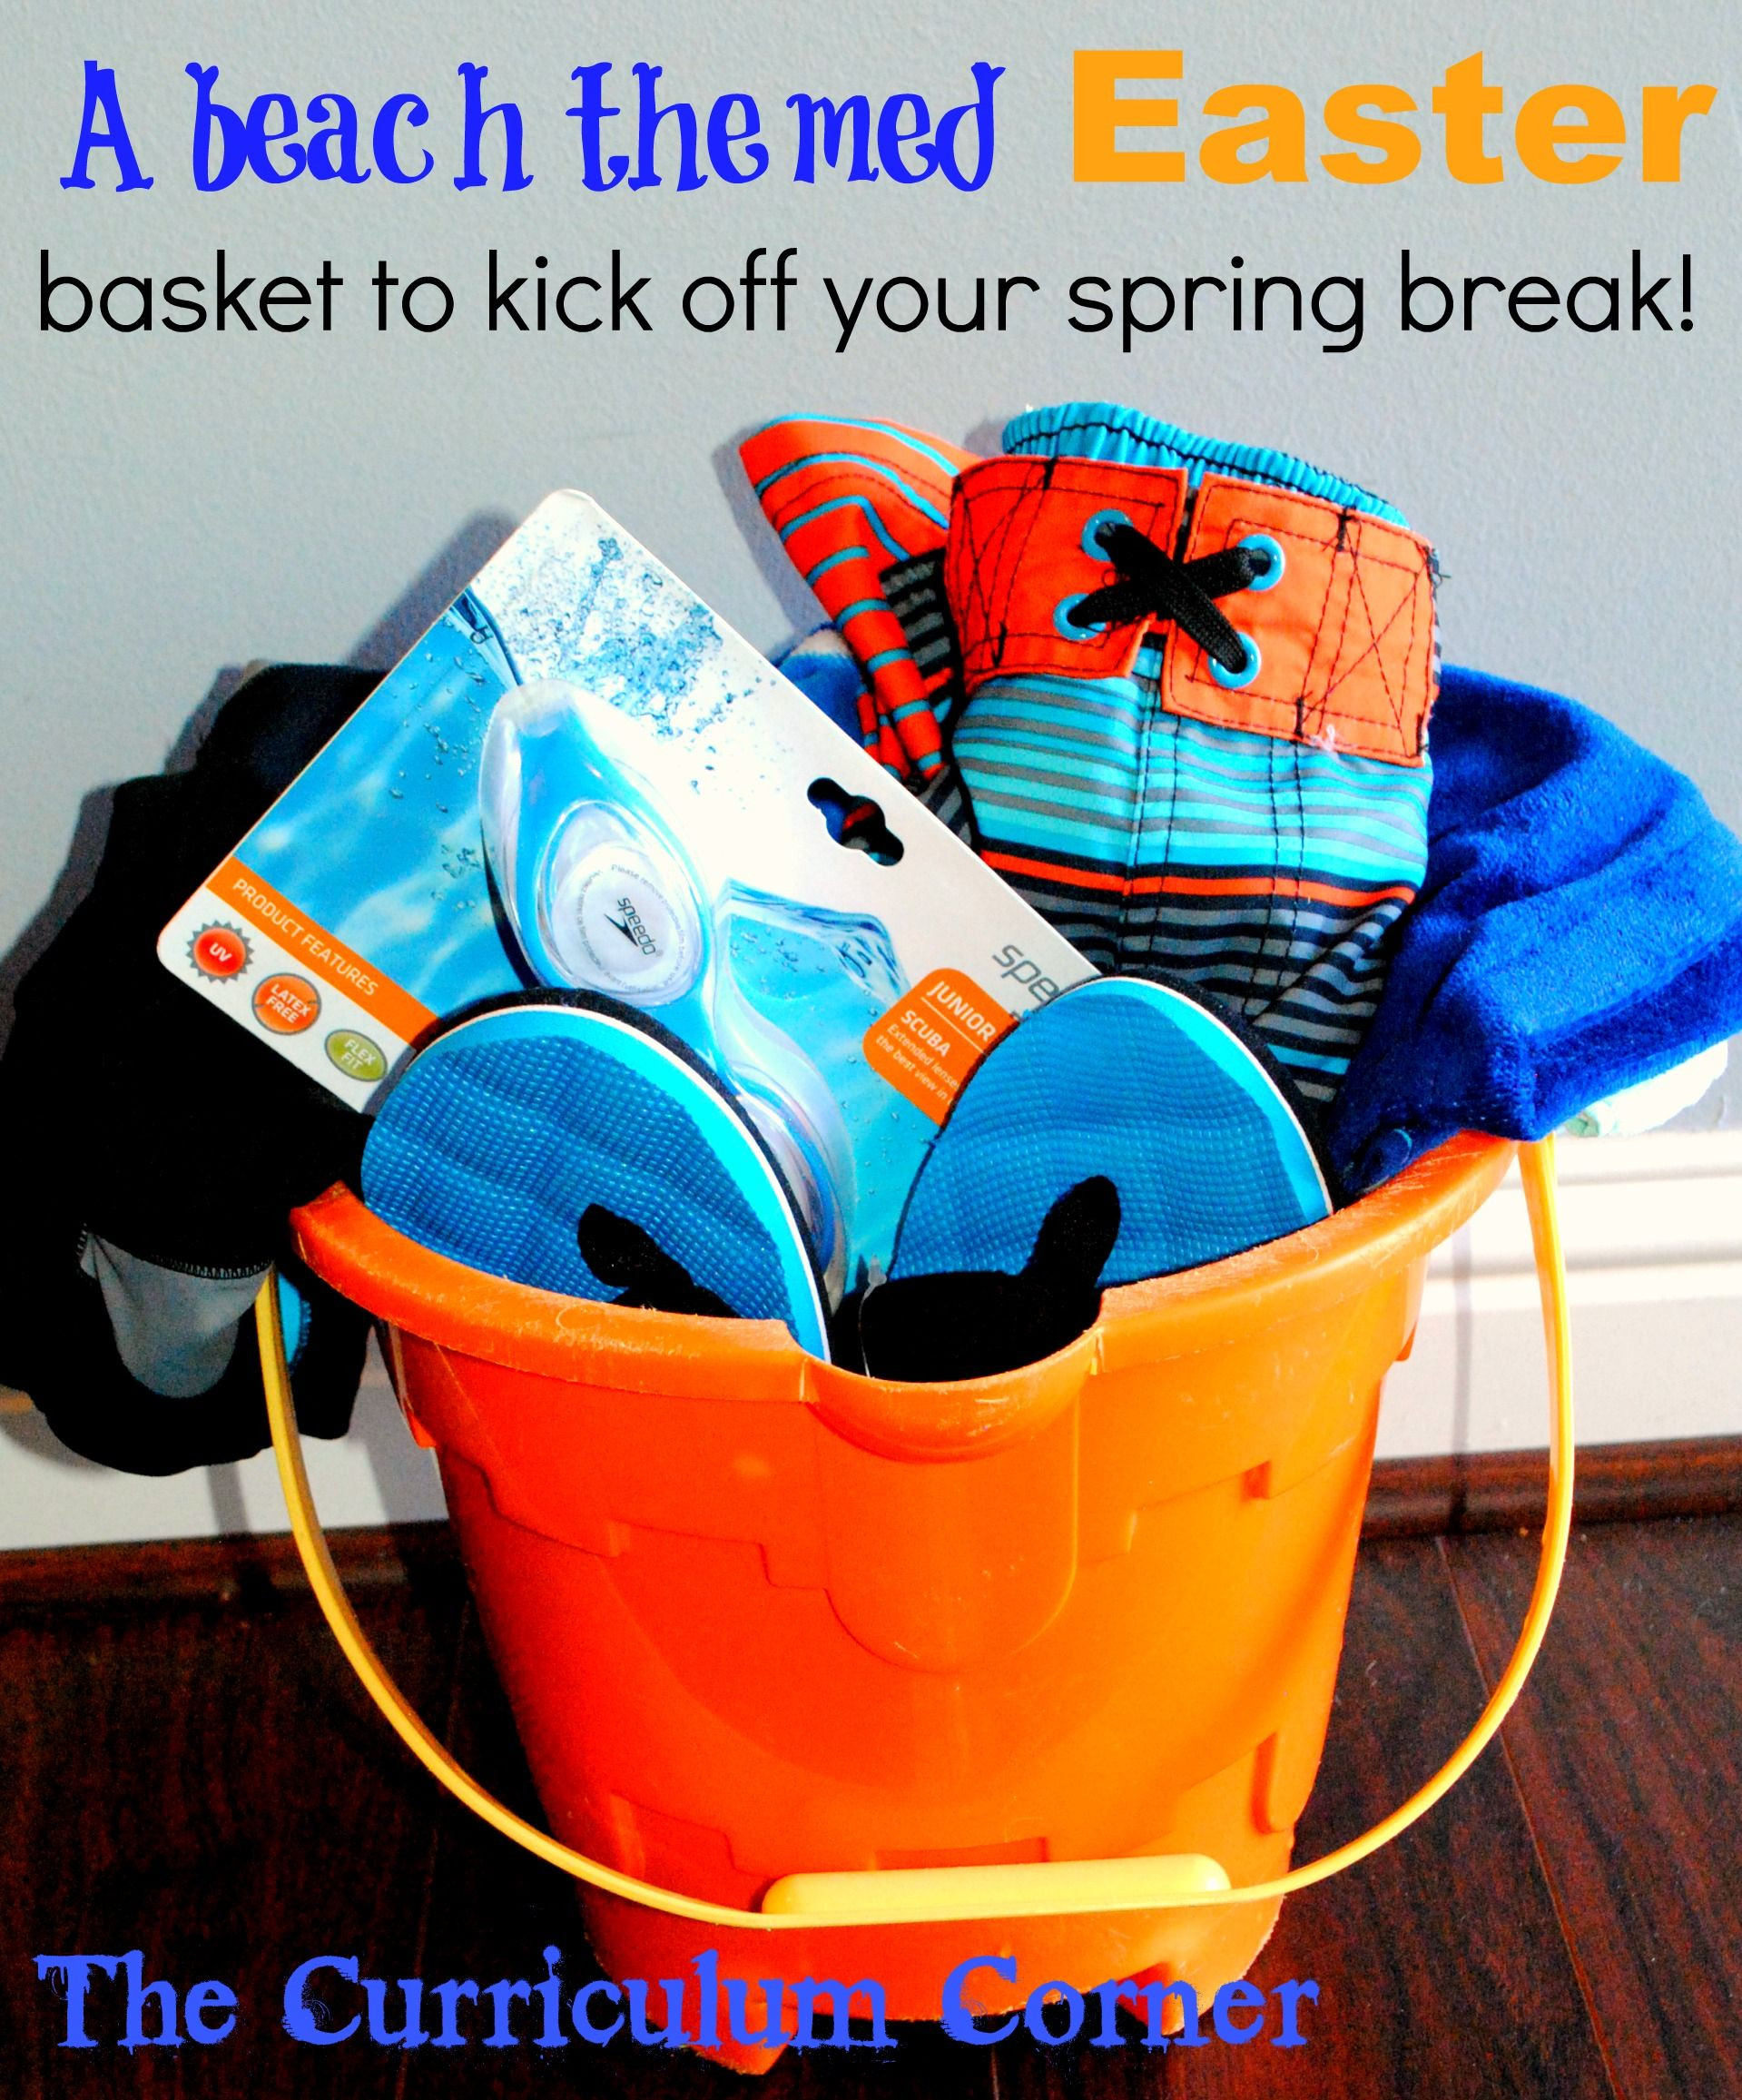 Beach Themed Gift Basket Ideas
 A beach themed Easter basket to kick off your spring break